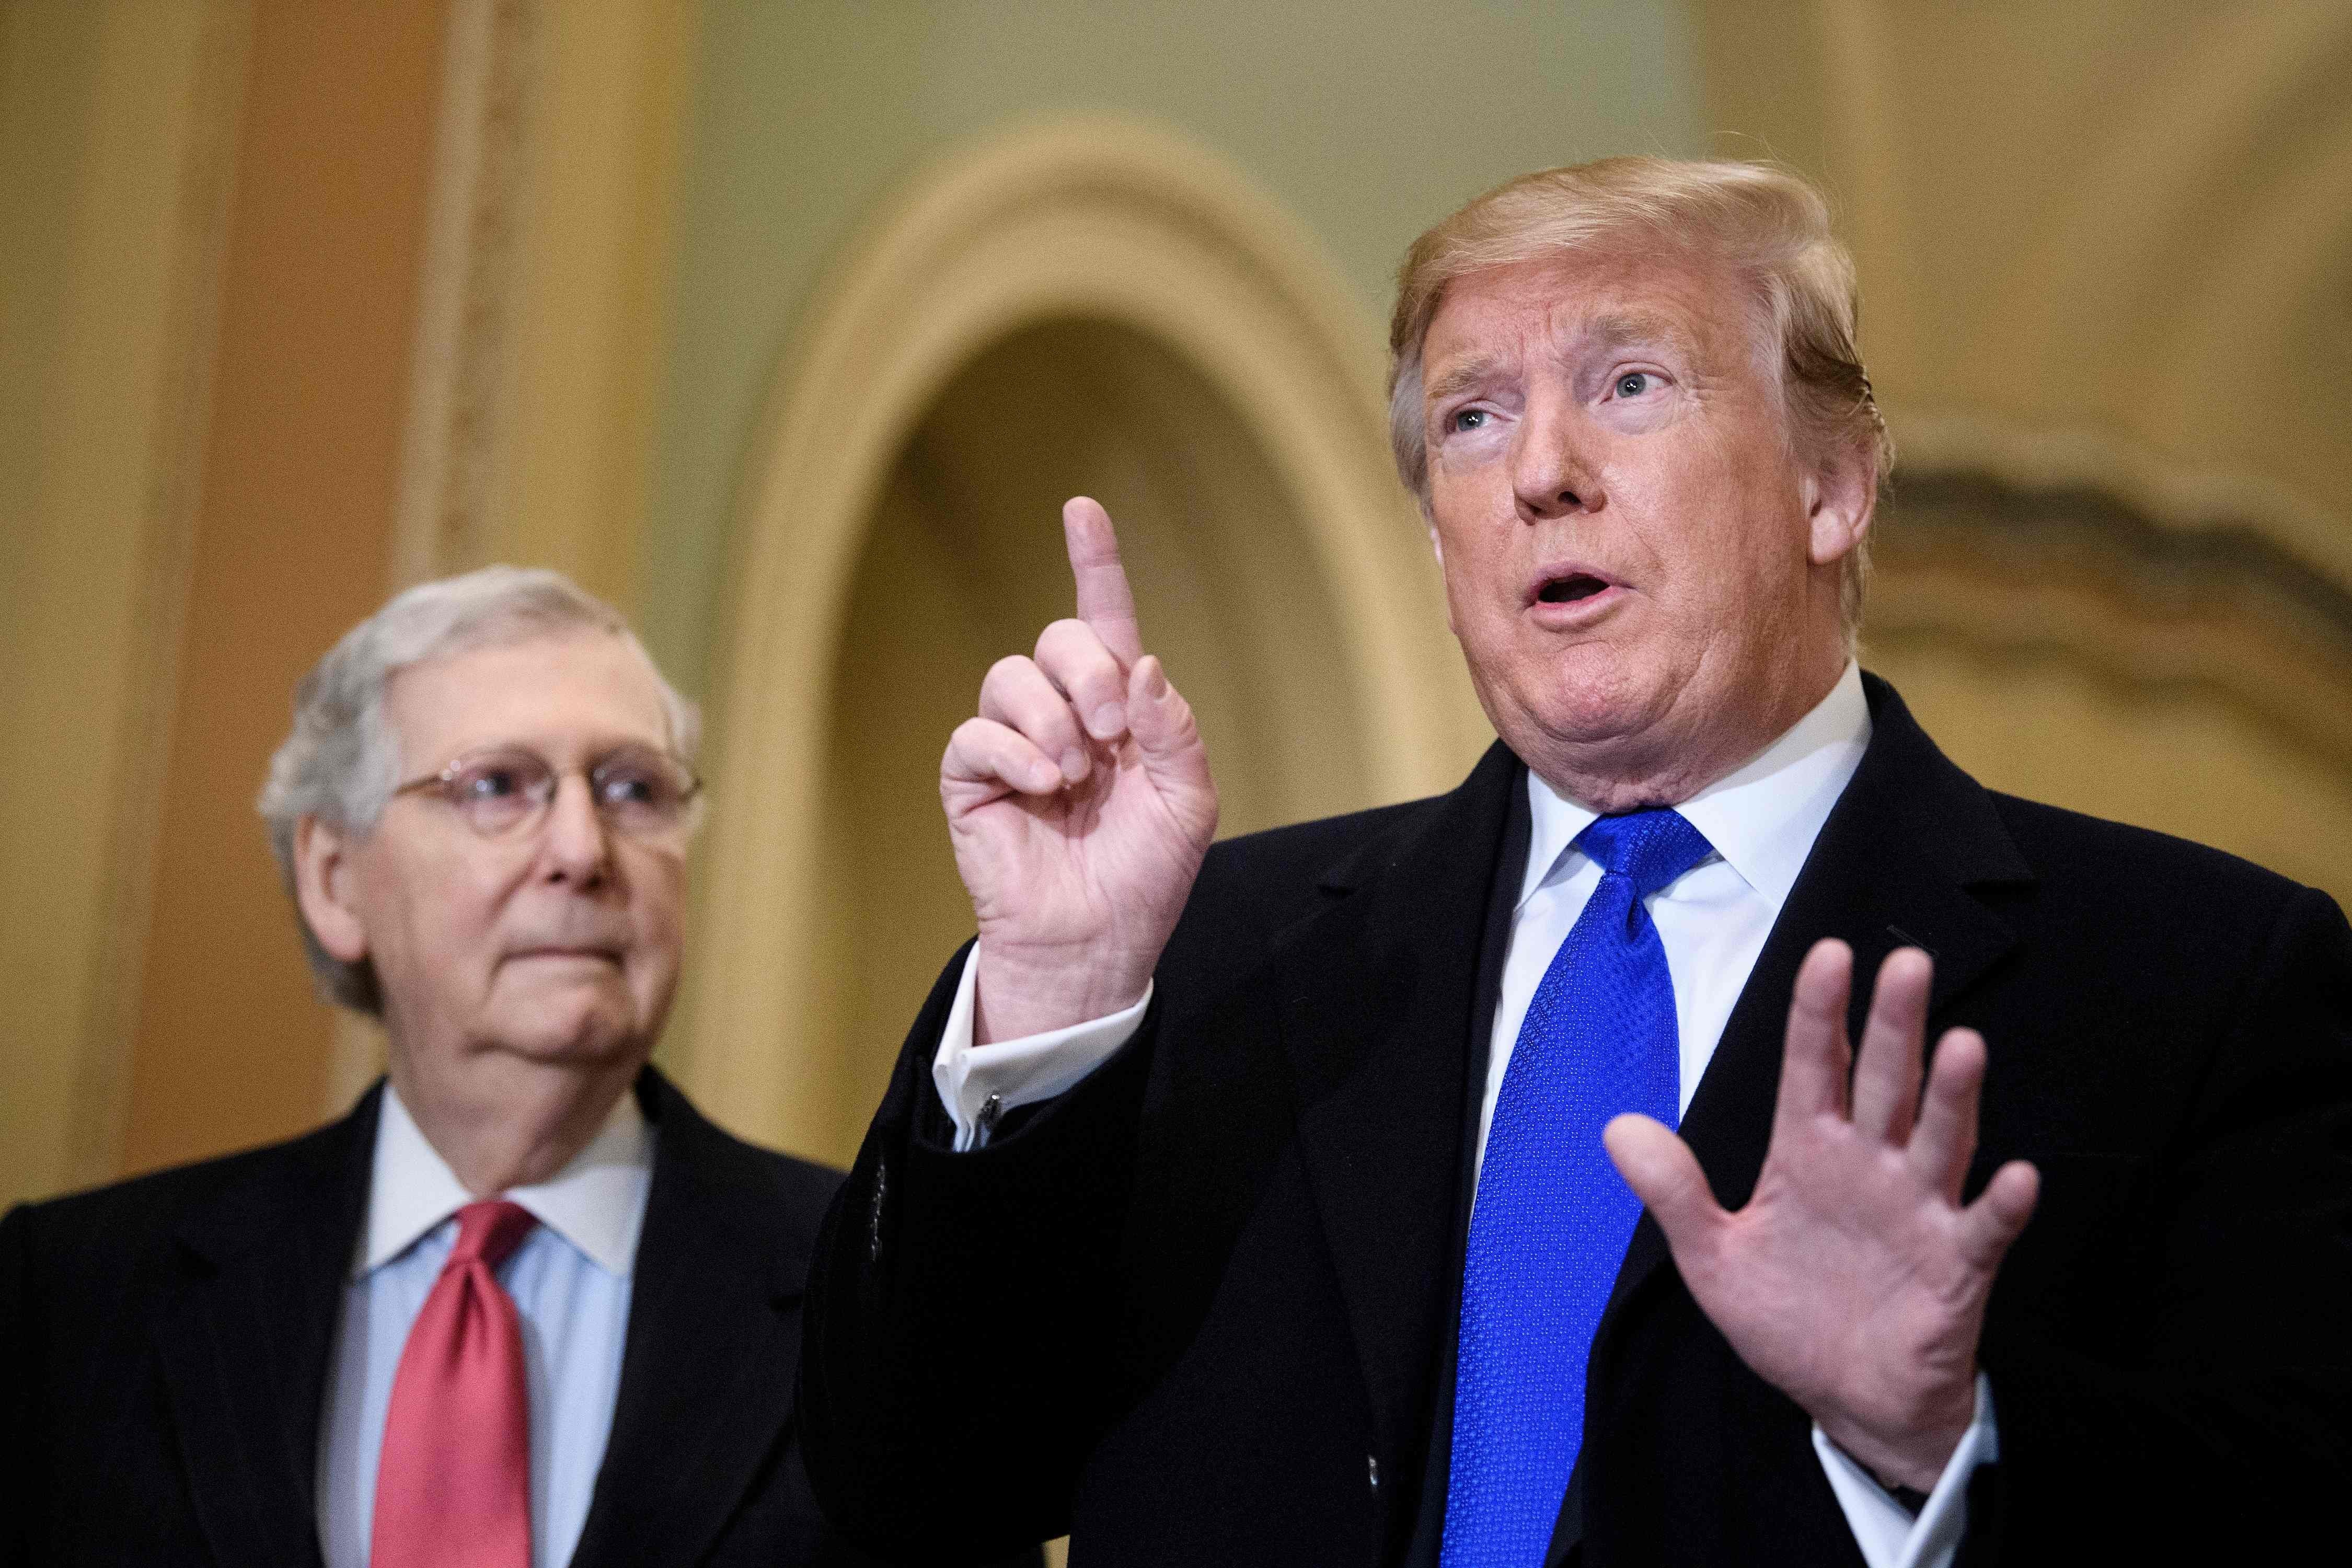 Senate majority leader Senator Mitch McConnell (left) listens while US President Donald Trump speaks to reporters before a meeting with Senate Republicans on Capitol Hill in Washington in March 2019. Photo: AFP